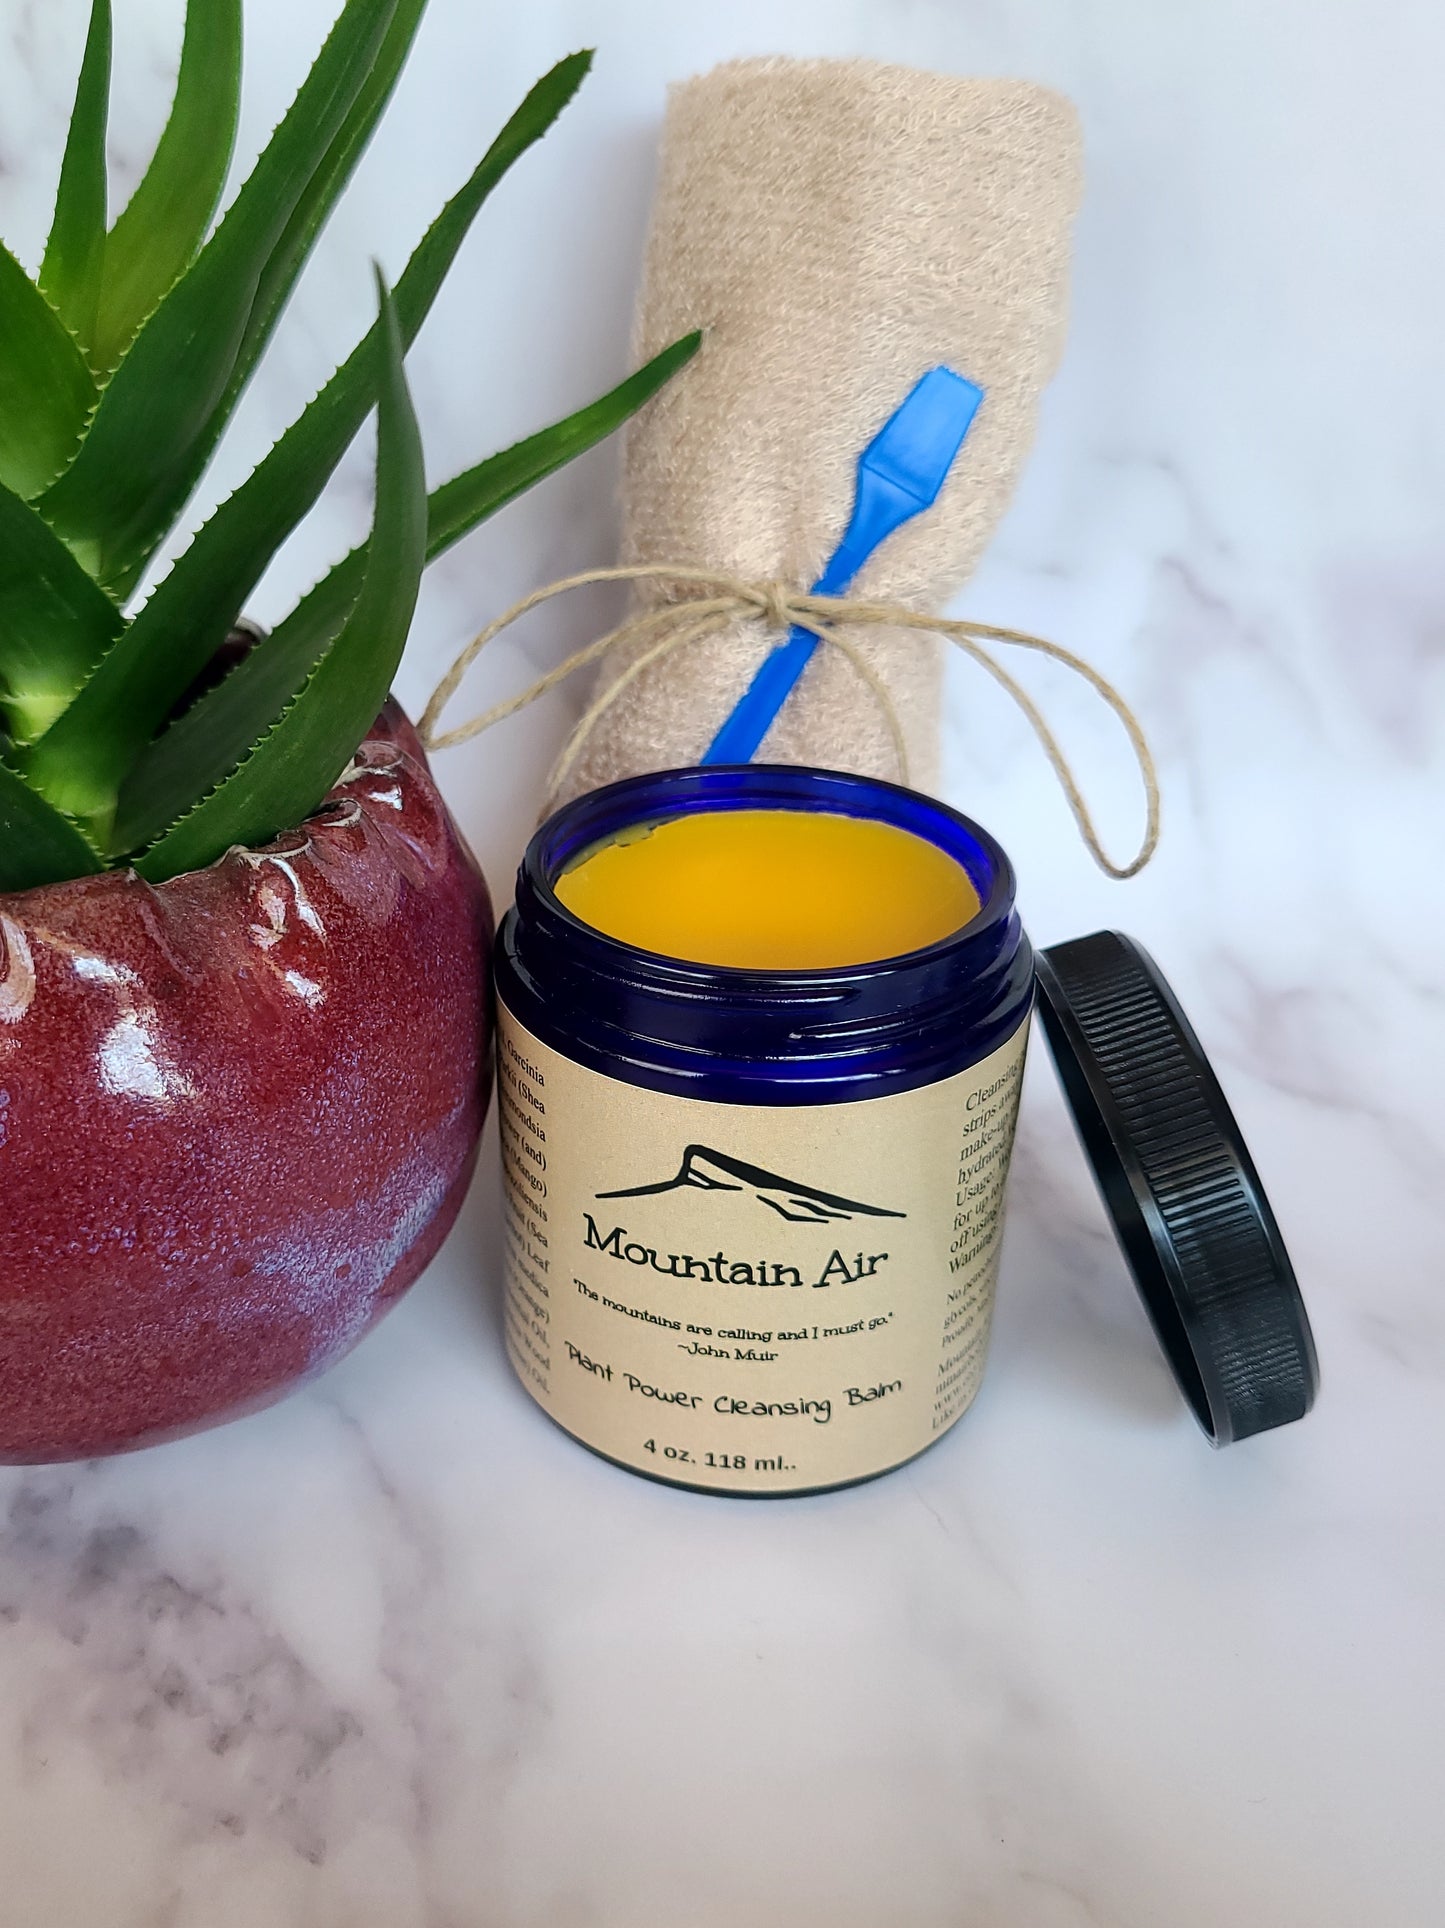 Plant Power Cleansing Balm 2 Ounce